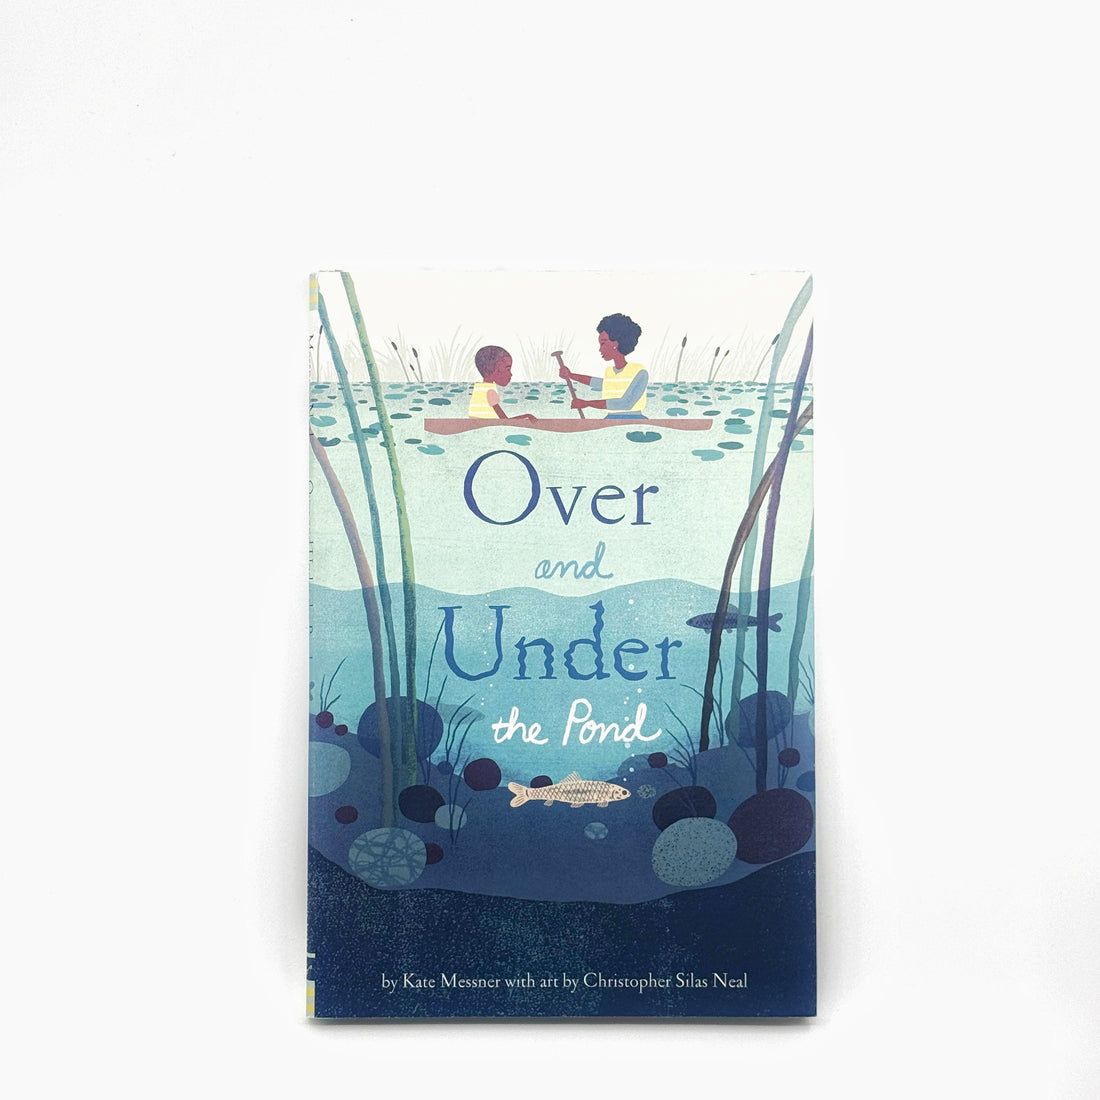 Over and Under the Pond by Kate Messner